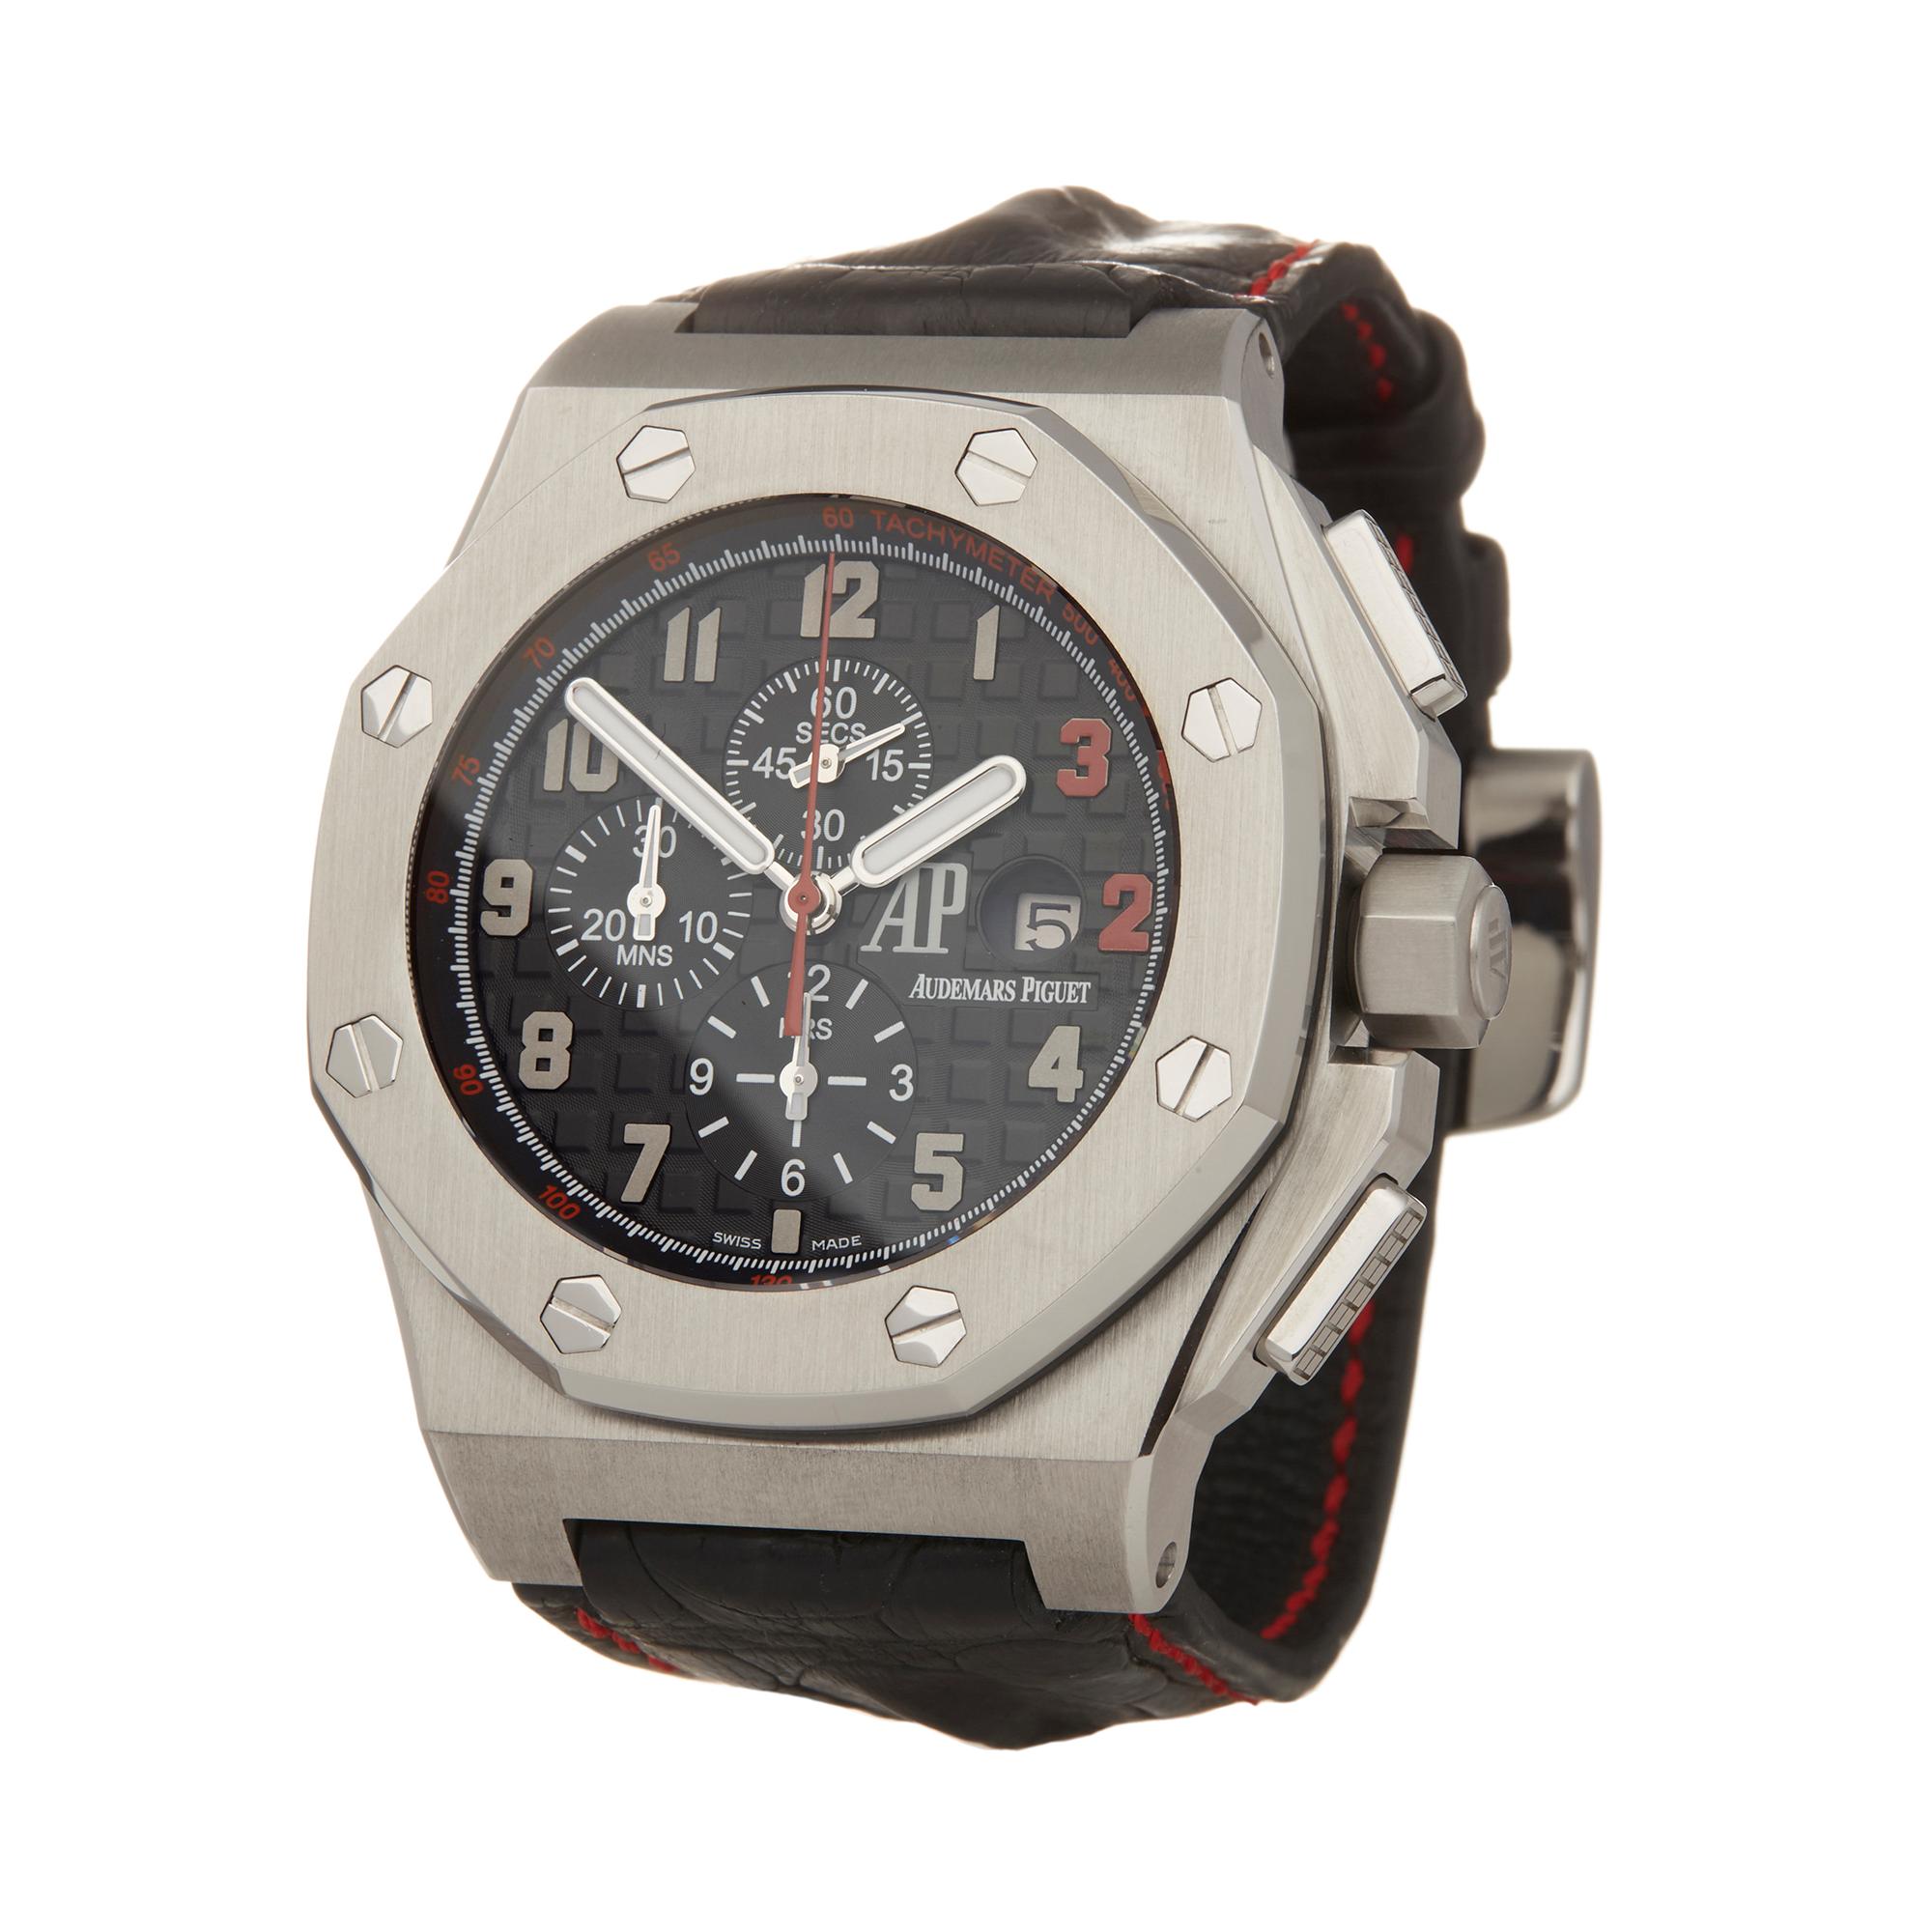 Ref: W5901
Manufacturer: Audemars Piguet
Model: Royal Oak Offshore
Model Ref: 26133ST.00.A101CR.01
Age: 30th January 2008
Gender: Mens
Complete With: Box, Manuals & Guarantee
Dial: Black Arabic
Glass: Sapphire Crystal
Movement: Automatic
Water